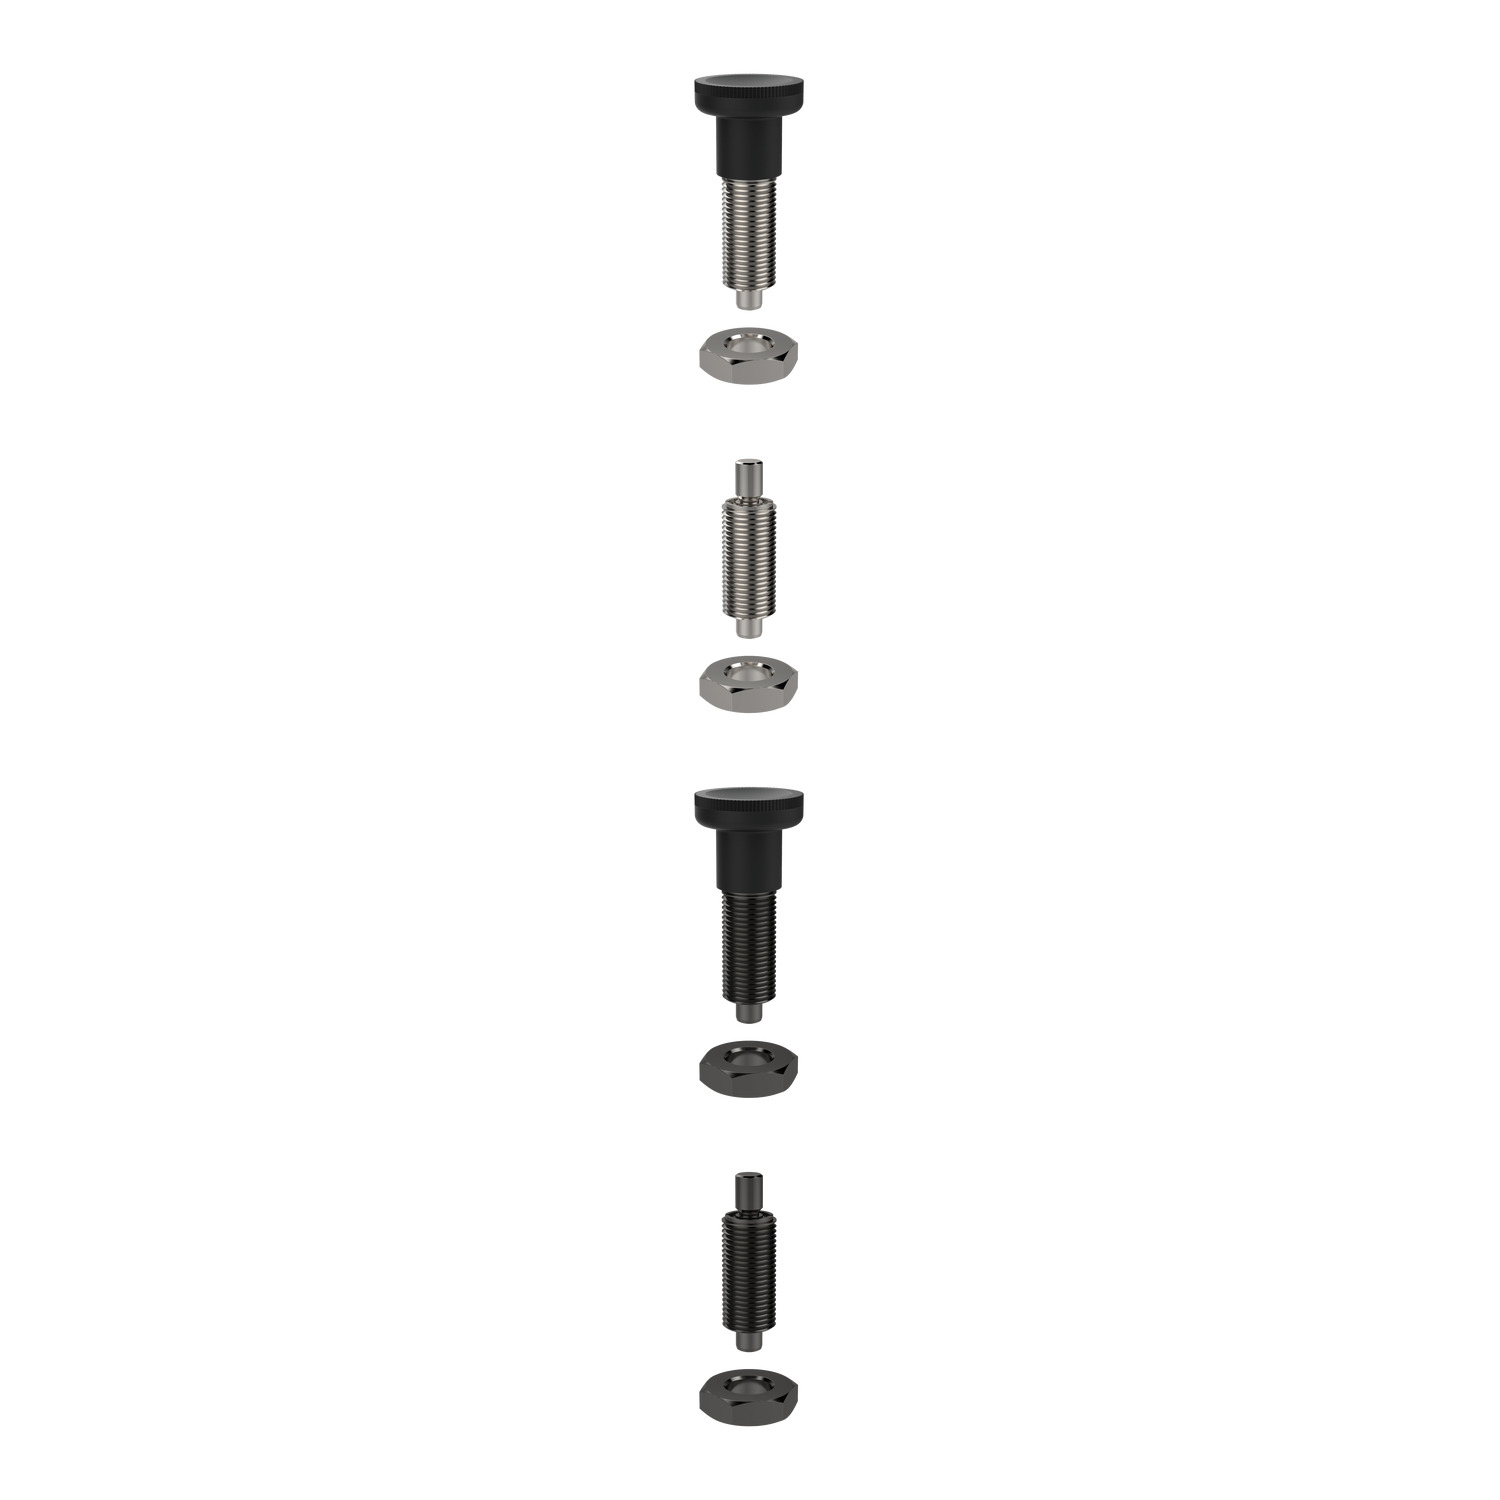 Index Plunger - Pull Grip Pull grip index plunger. Non-locking type- pin simply springs back when pull ring released.